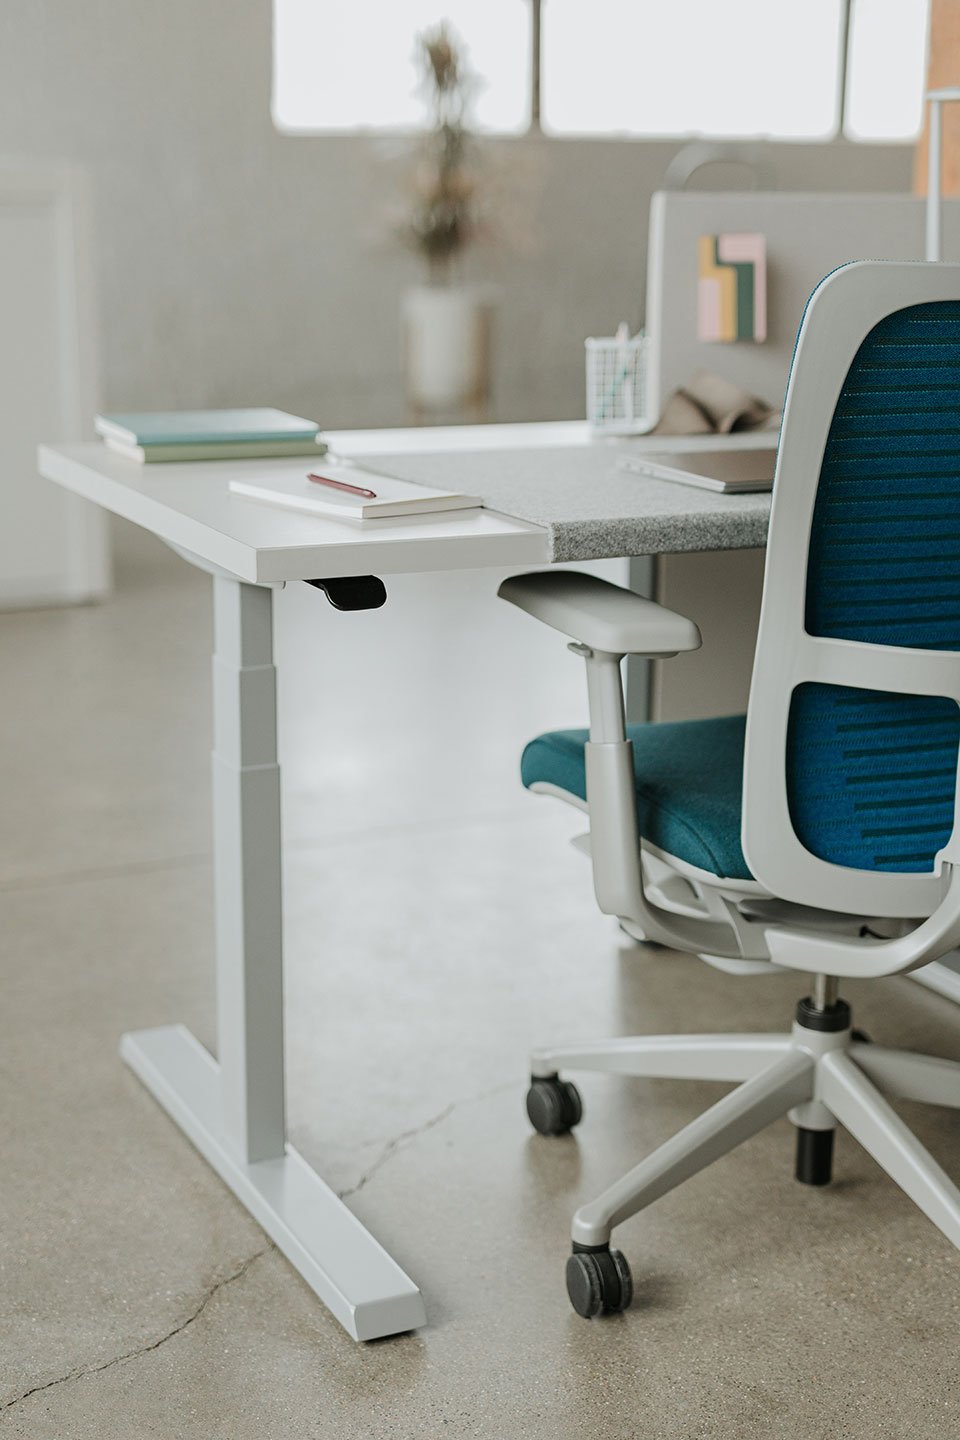 Haworth Upside Height Adjustable Table being used in as an office workspace